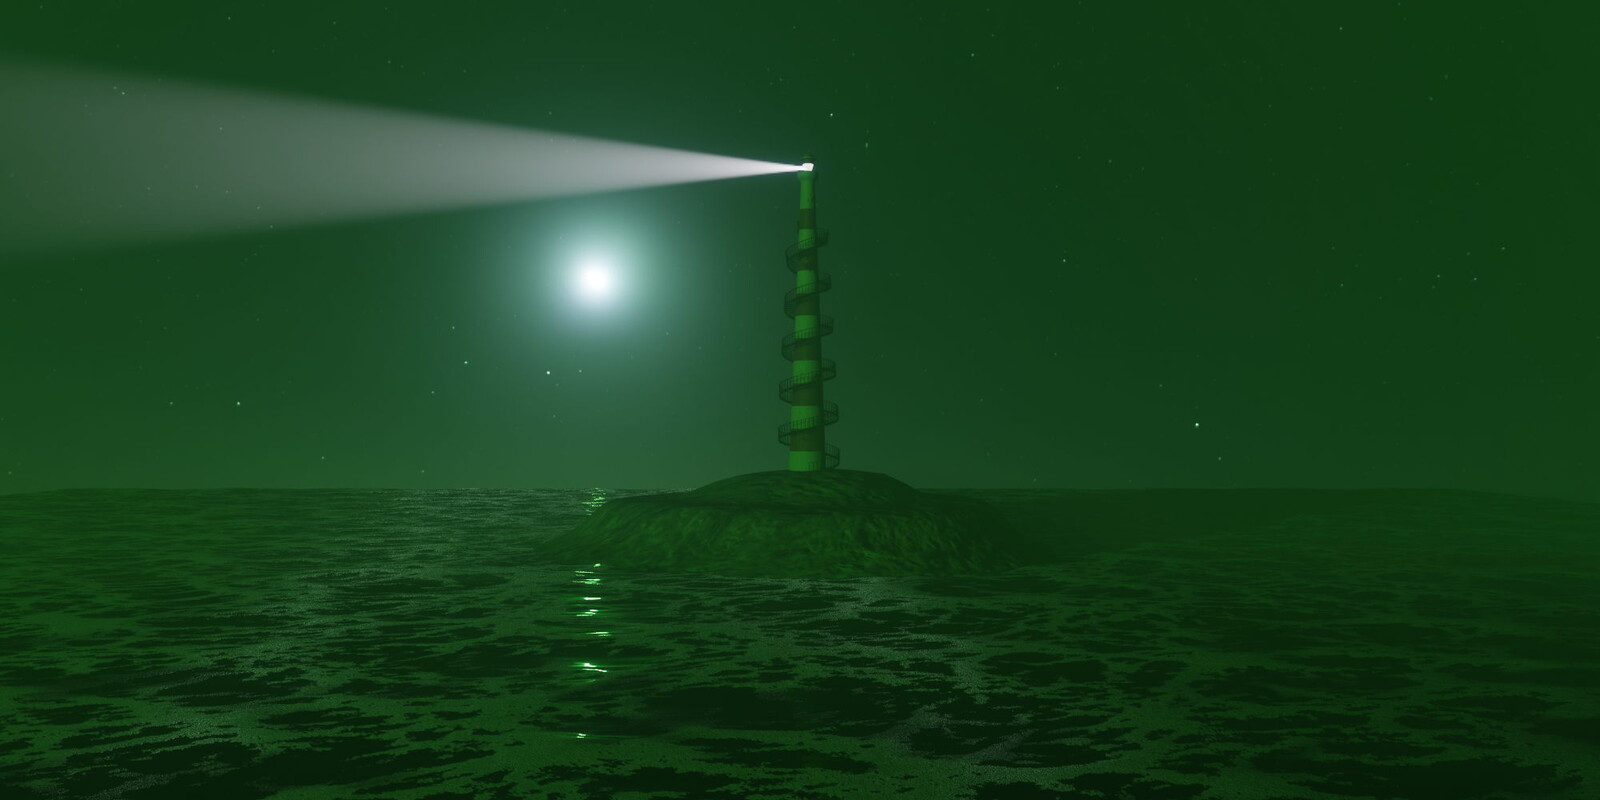 Here's a test still of the lighthouse at night. 